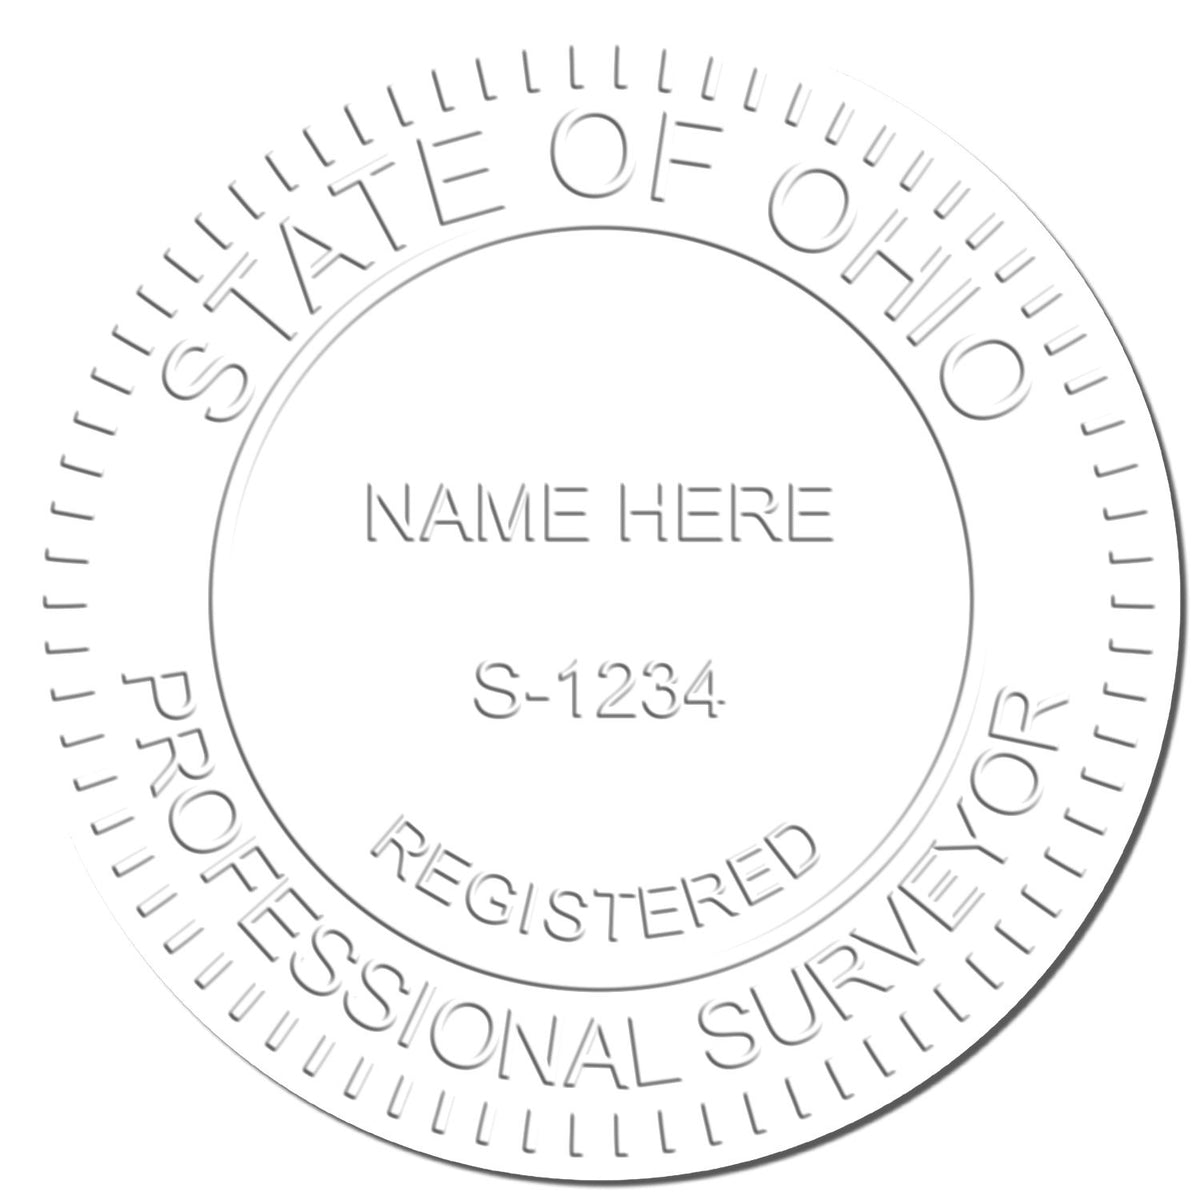 This paper is stamped with a sample imprint of the Hybrid Ohio Land Surveyor Seal, signifying its quality and reliability.